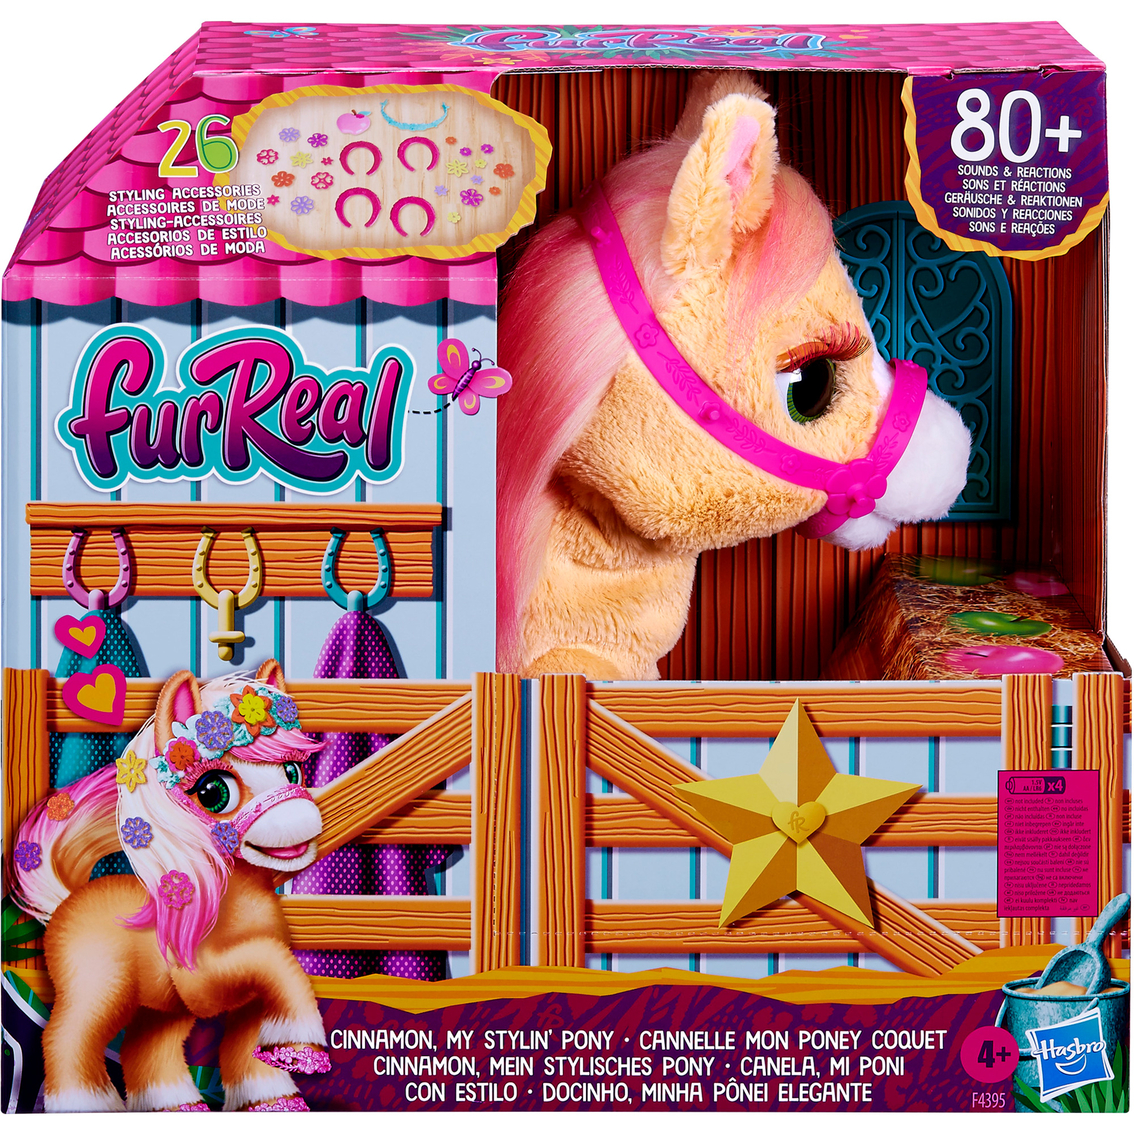 Furreal Friends Fur Real Cinnamon, My Stylin’ Pony Toy - Image 1 of 2